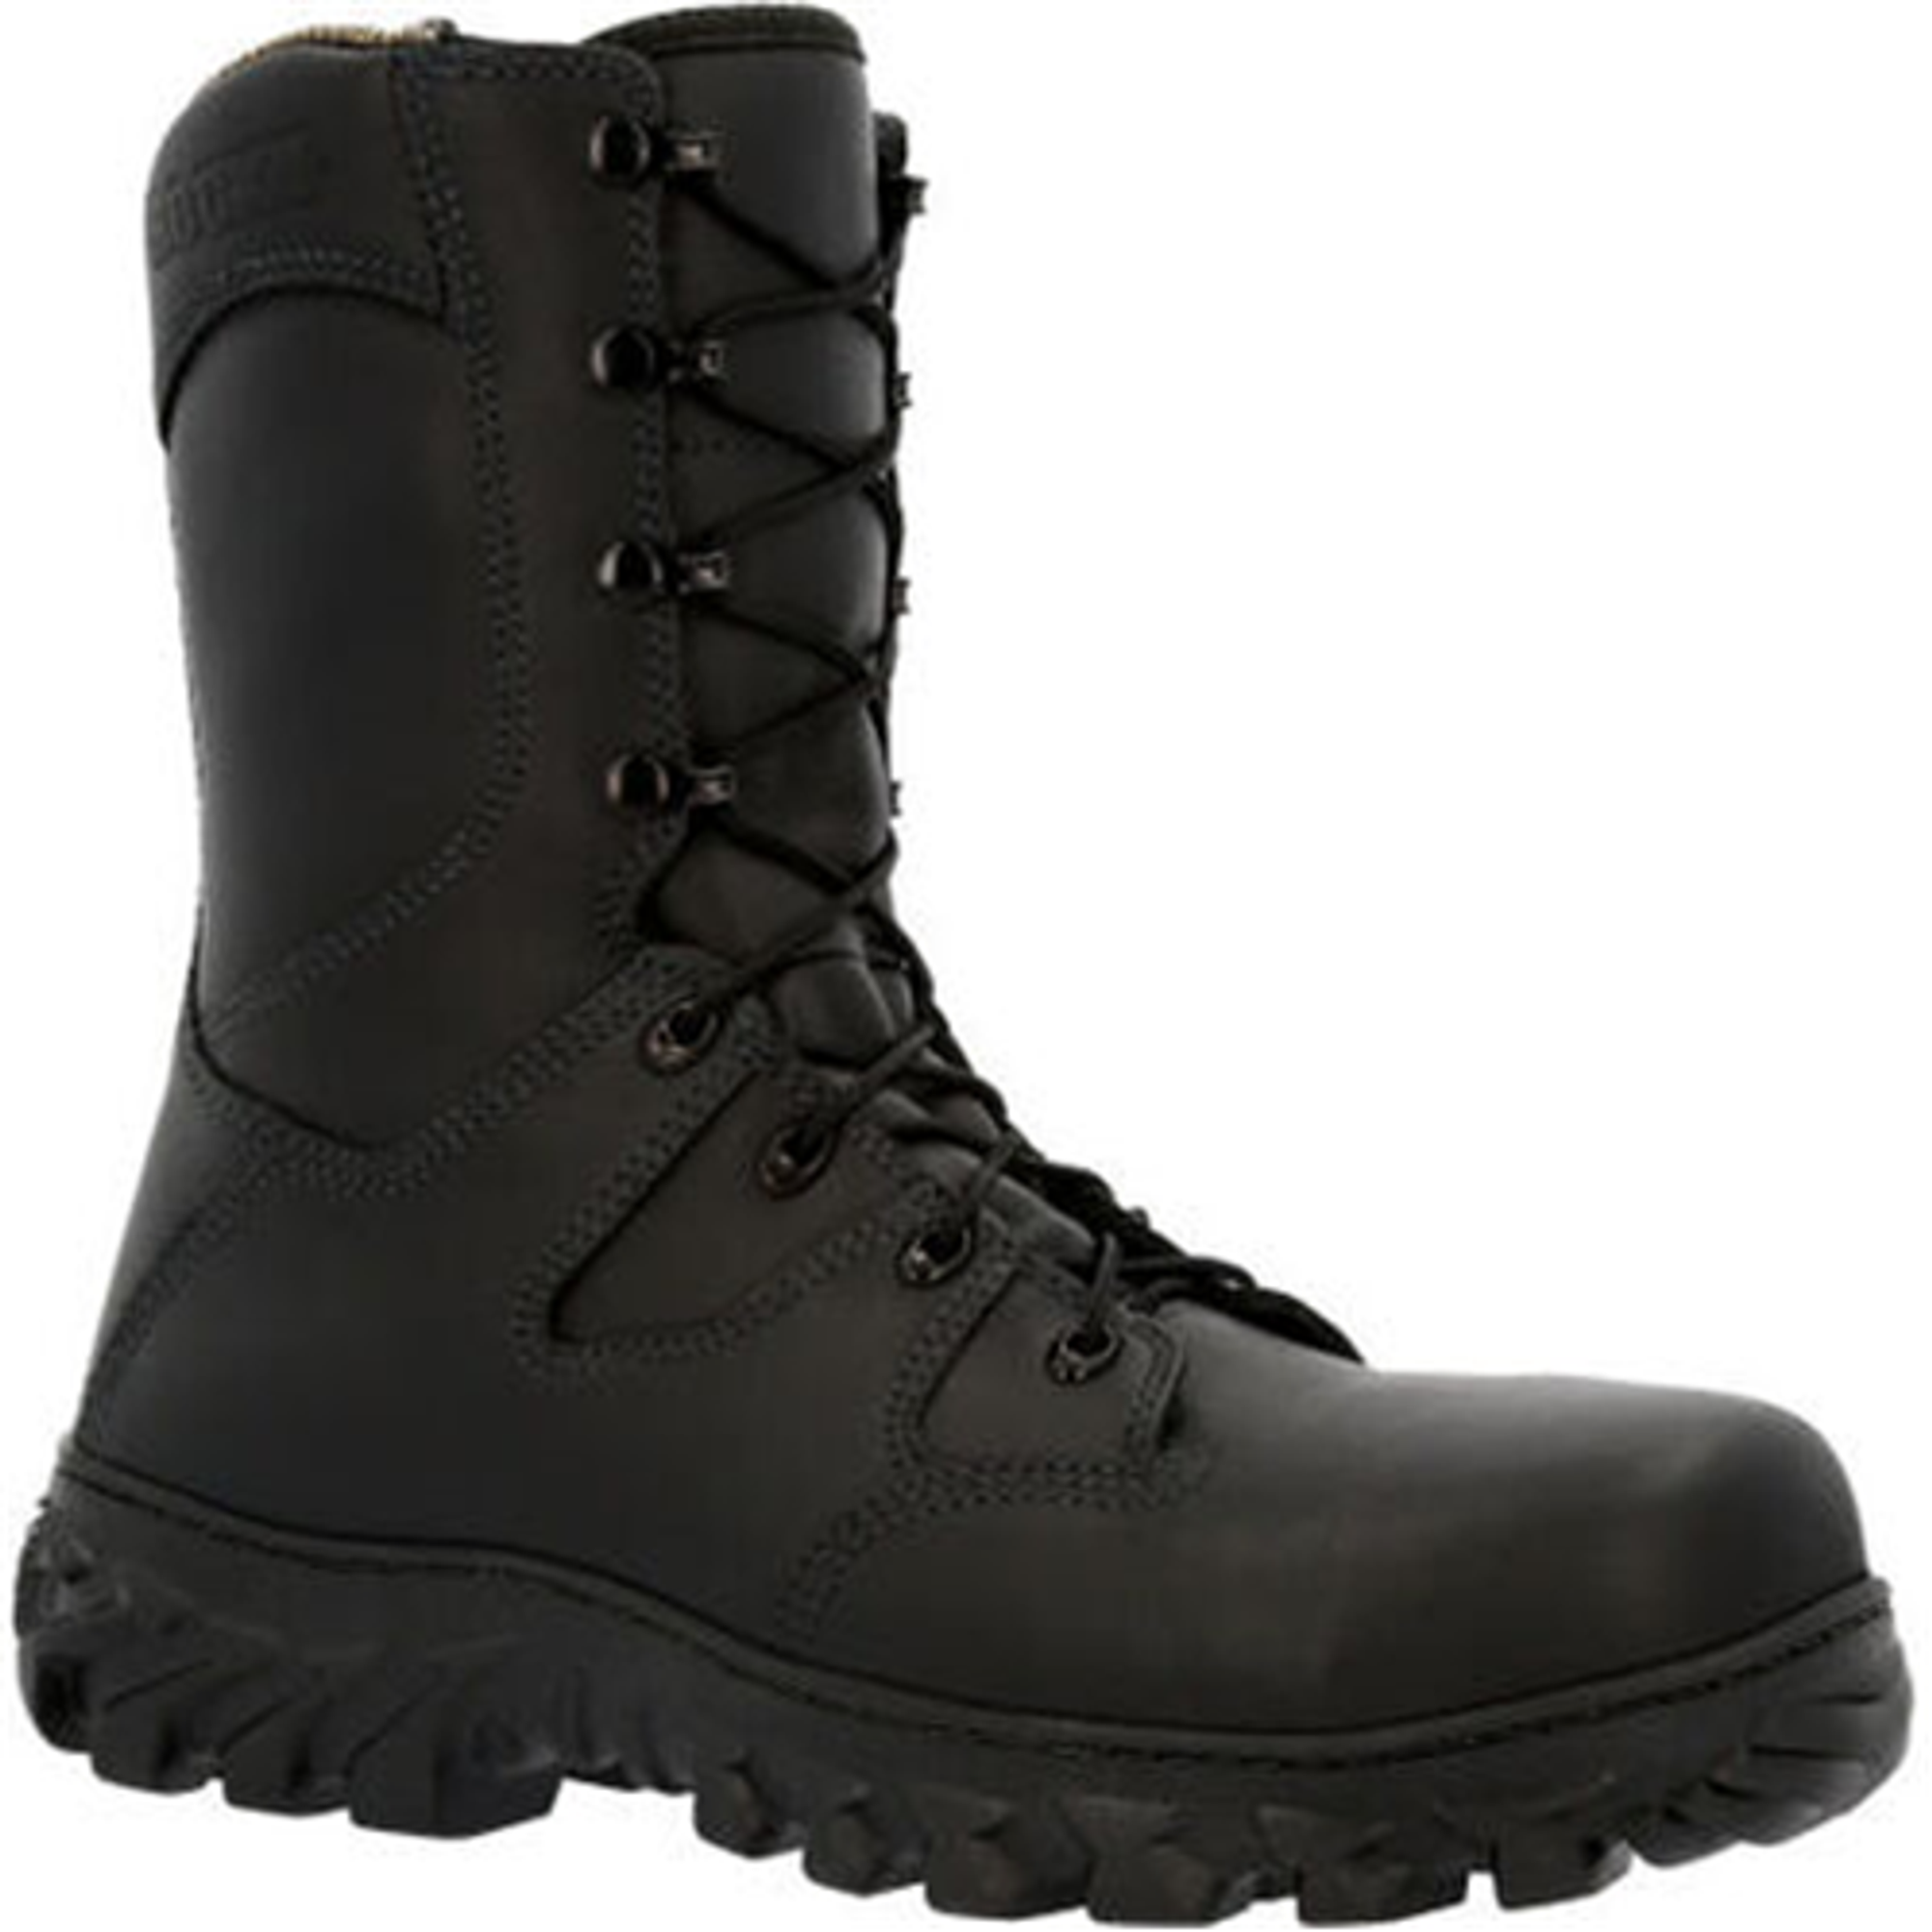 Rocky Code Red Rescue Fire Boot - KRRCK-RKD0086BK9M